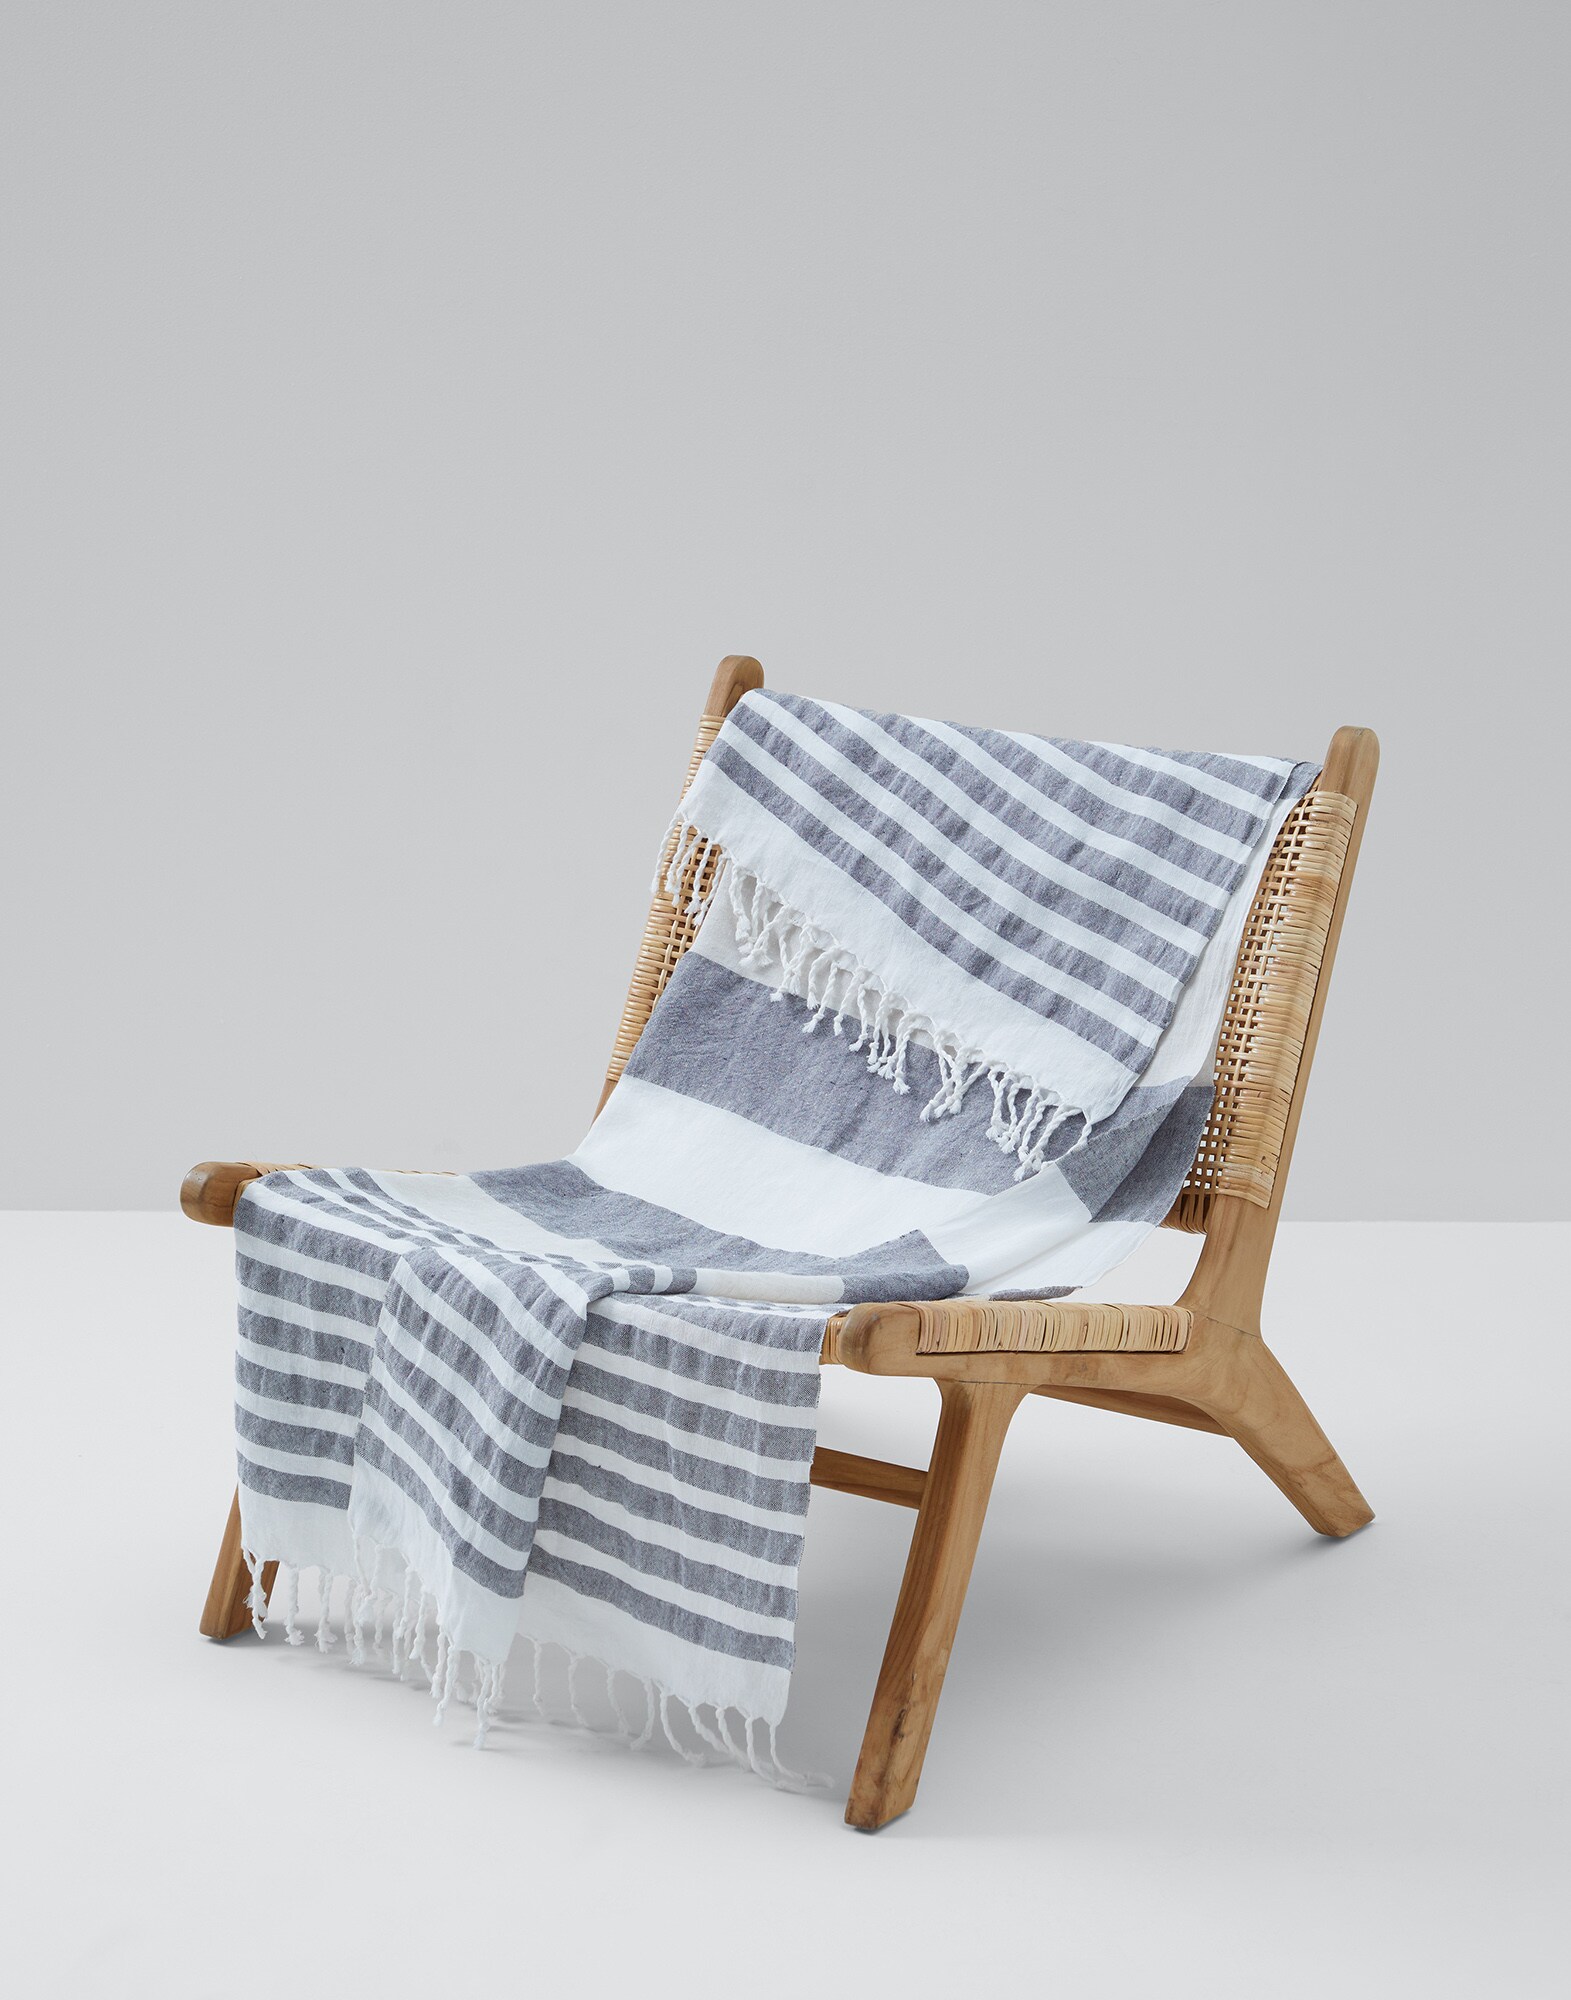 Linen towel with stripes